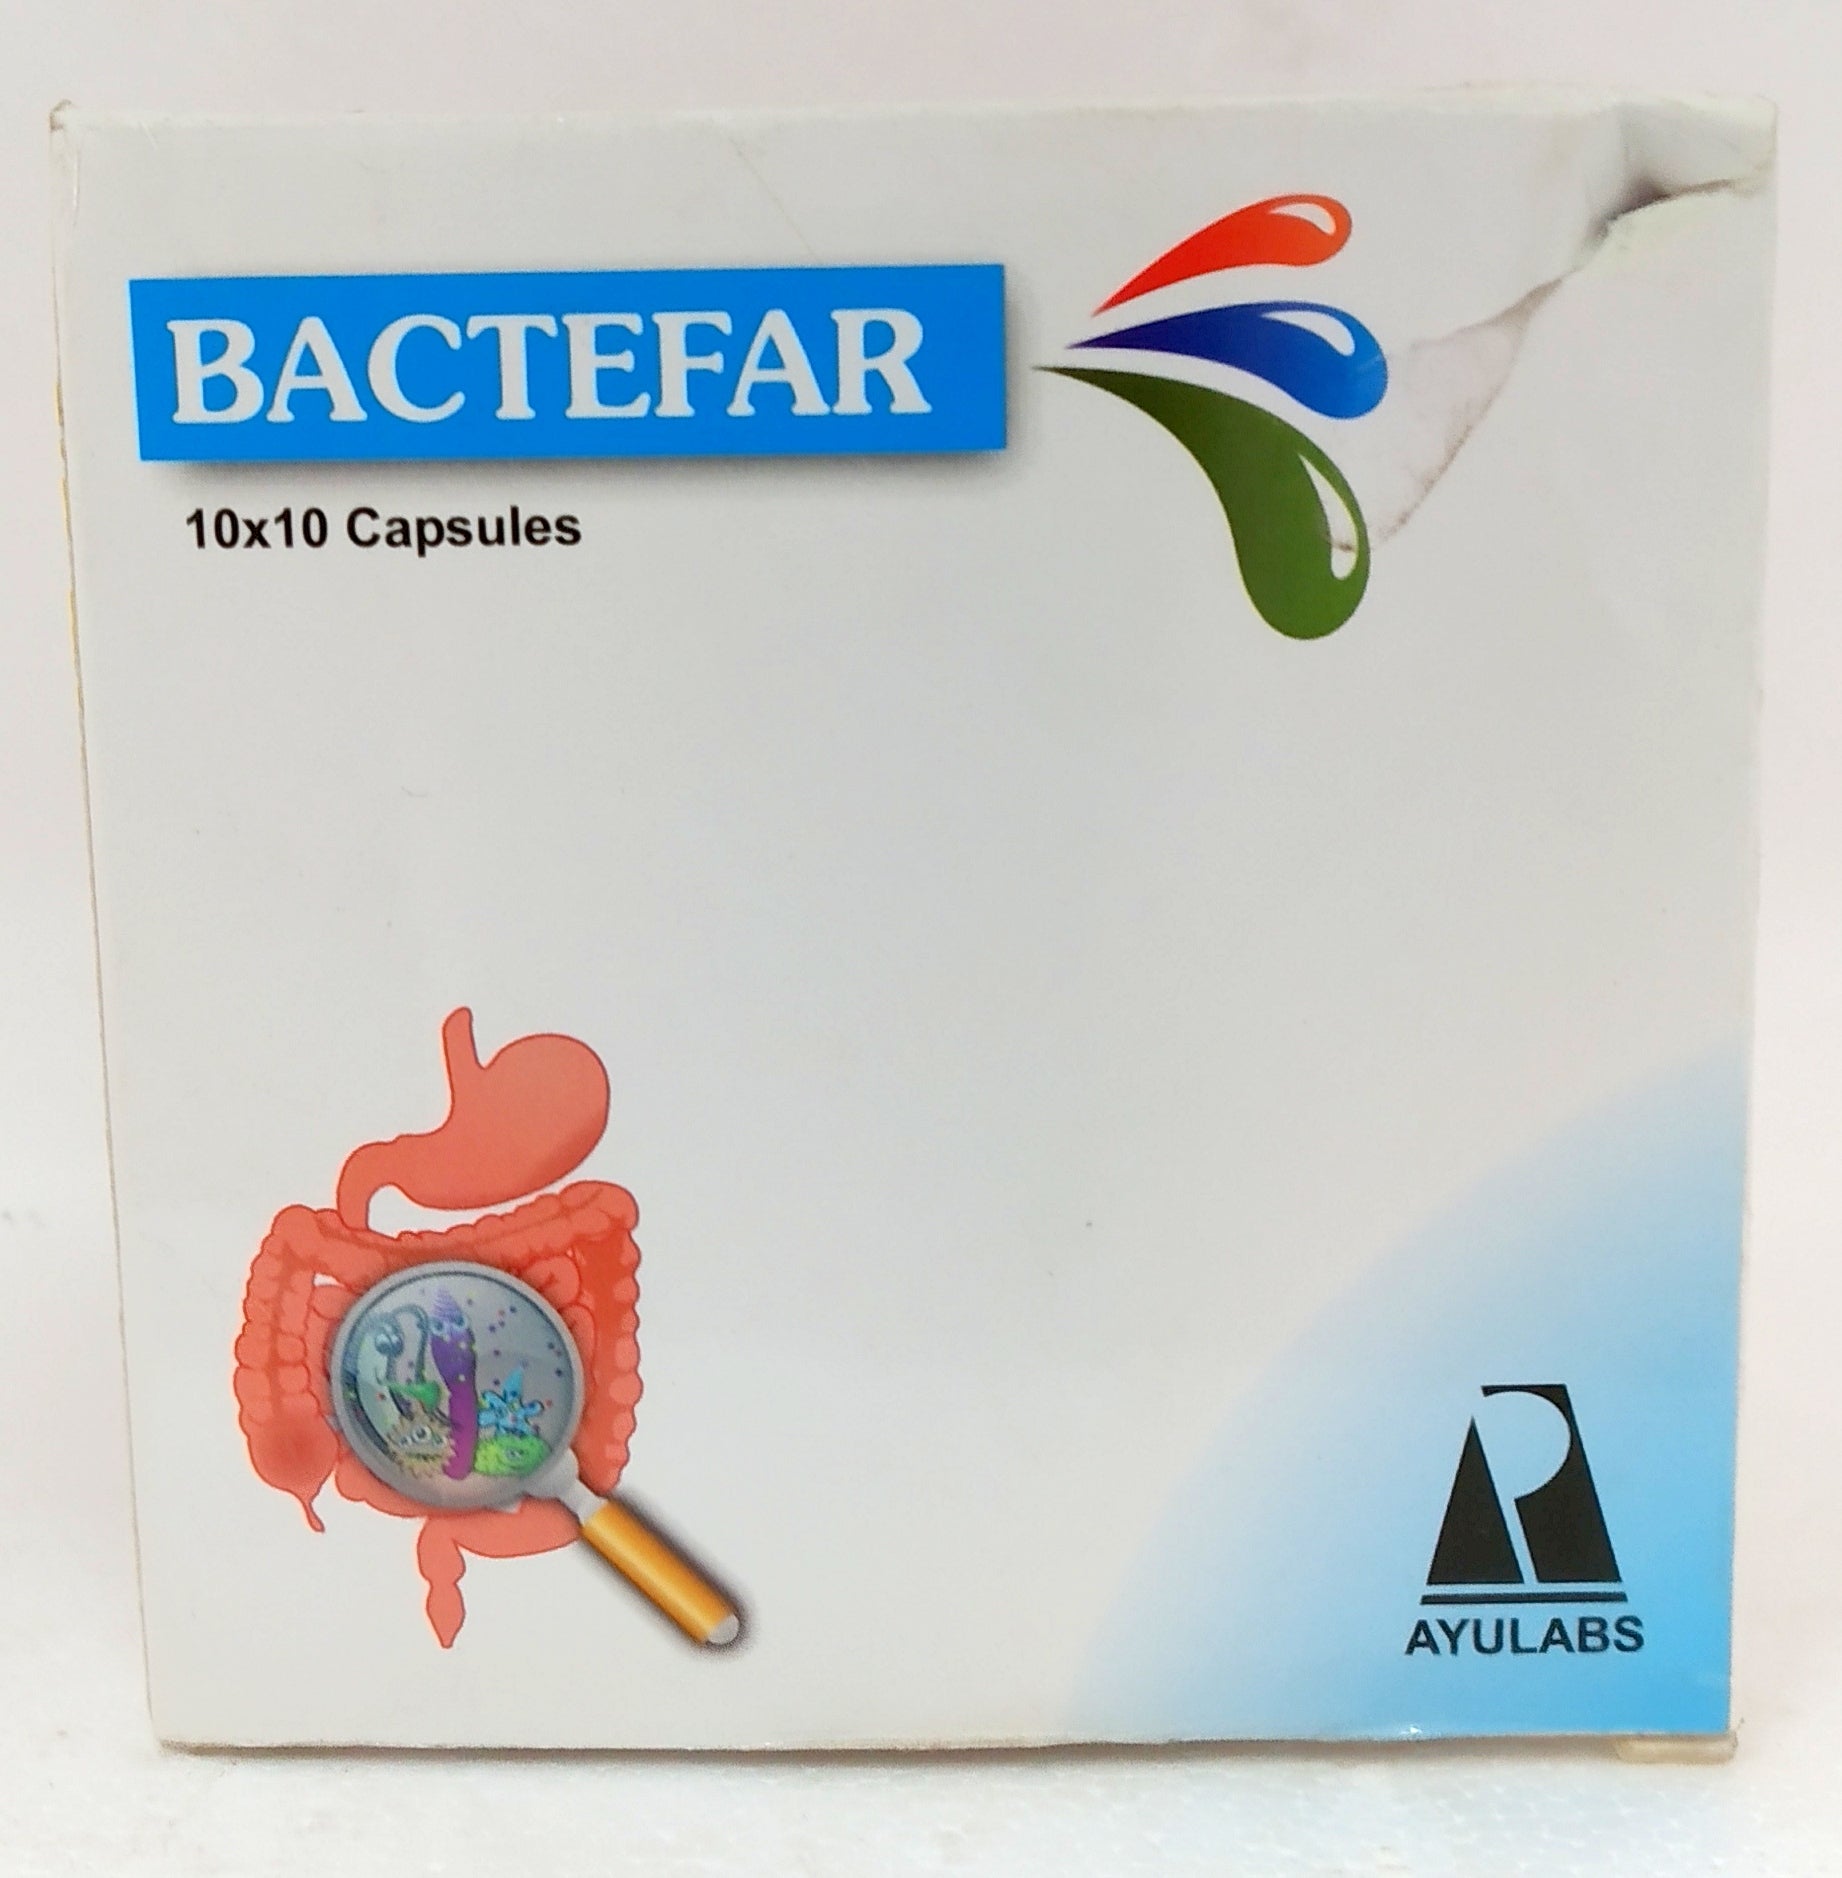 Shop Bactefar 10Capsules at price 49.00 from Ayulabs Online - Ayush Care